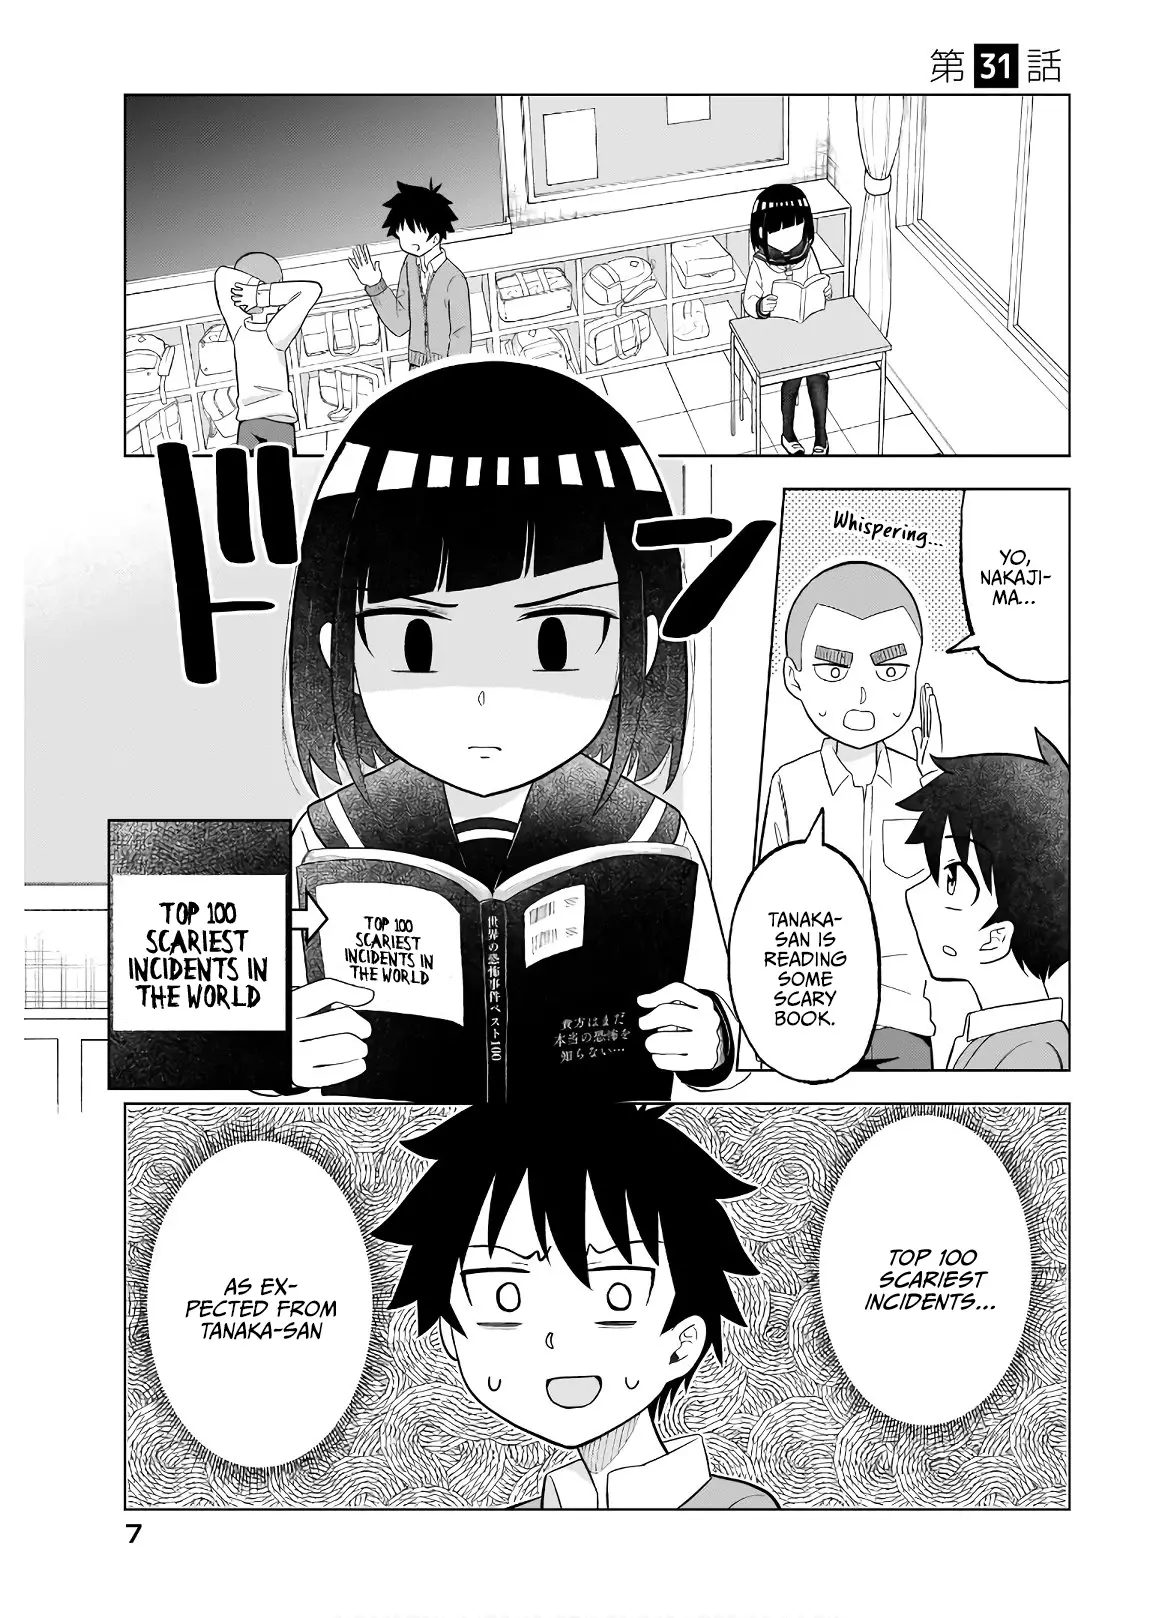 My Classmate Tanaka-San Is Super Scary - 31 page 4